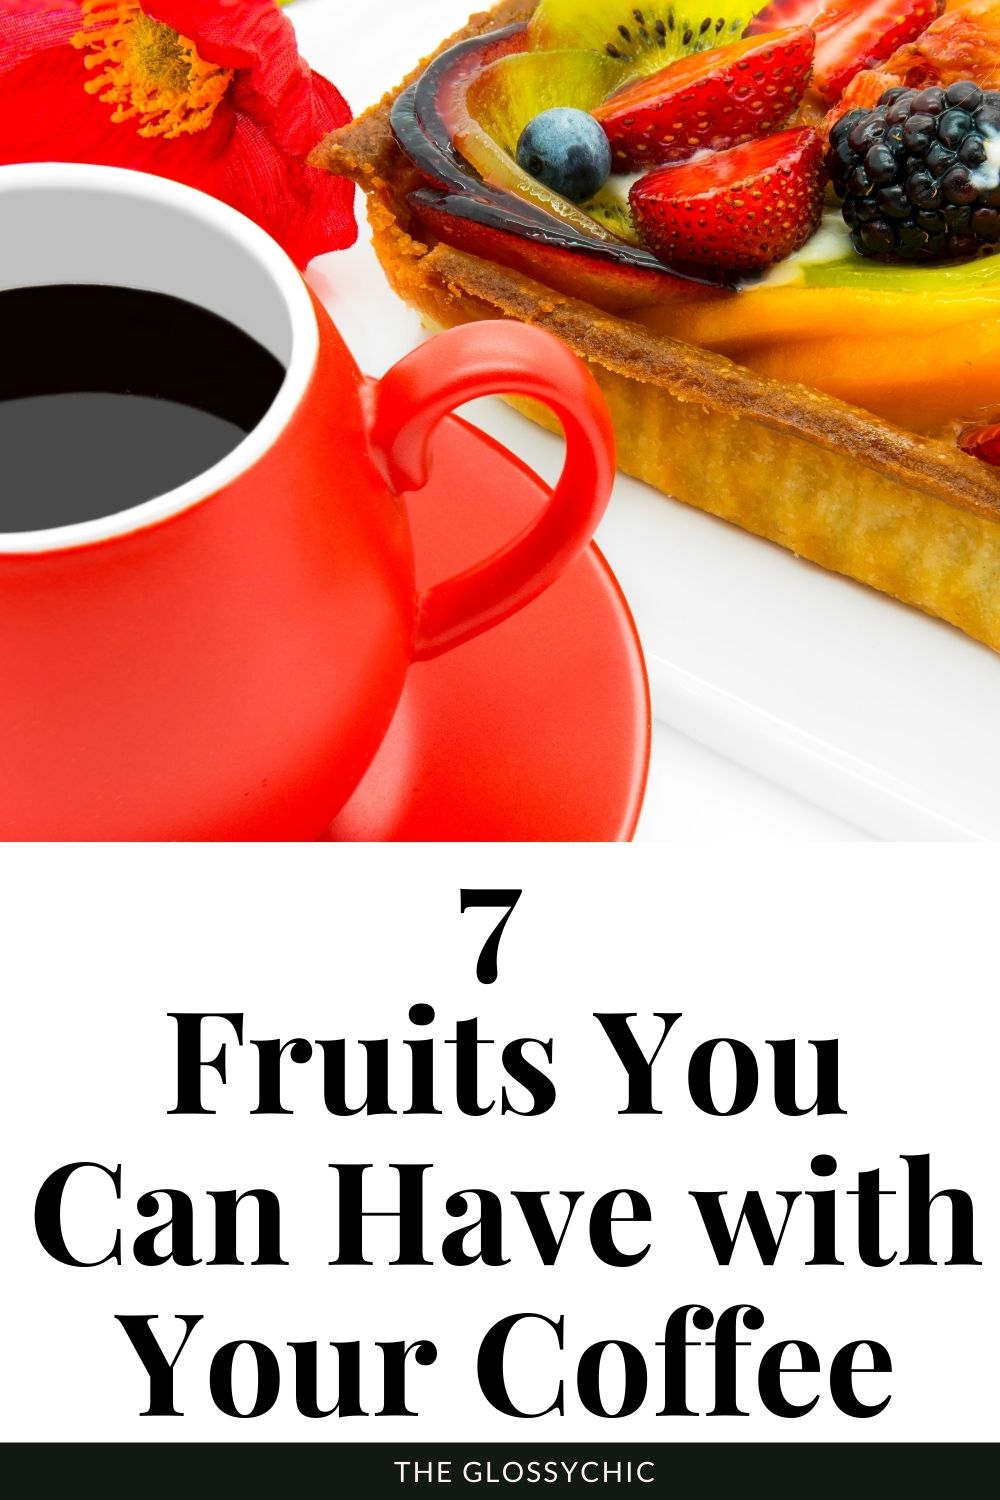 7 Fruits You Can Have with Your Coffee